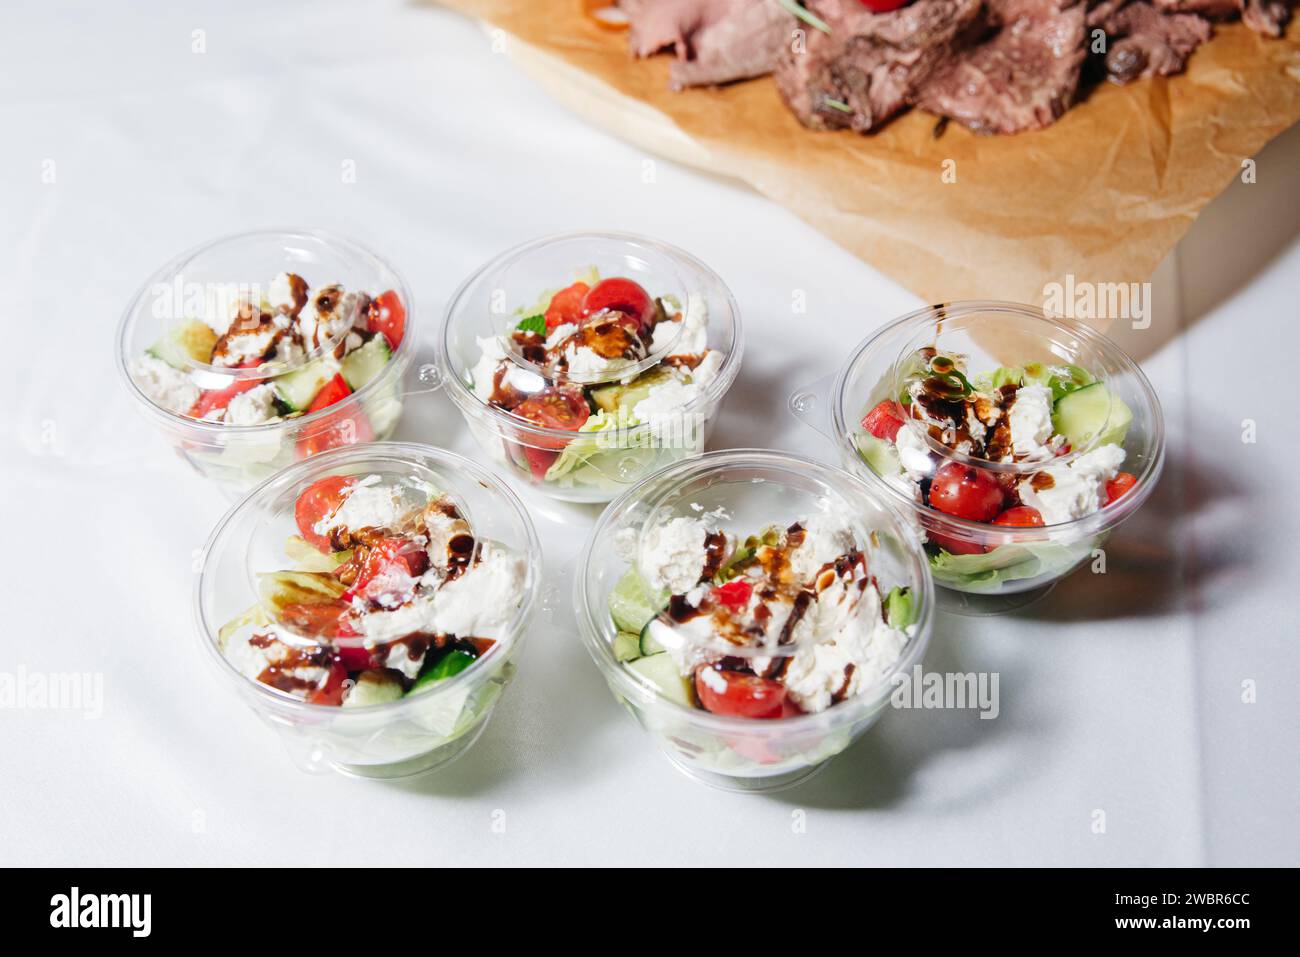 Individual serving bowls of Greek salad with feta cheese, olives, and fresh vegetables, drizzled with balsamic dressing on a white tablecloth. Stock Photo